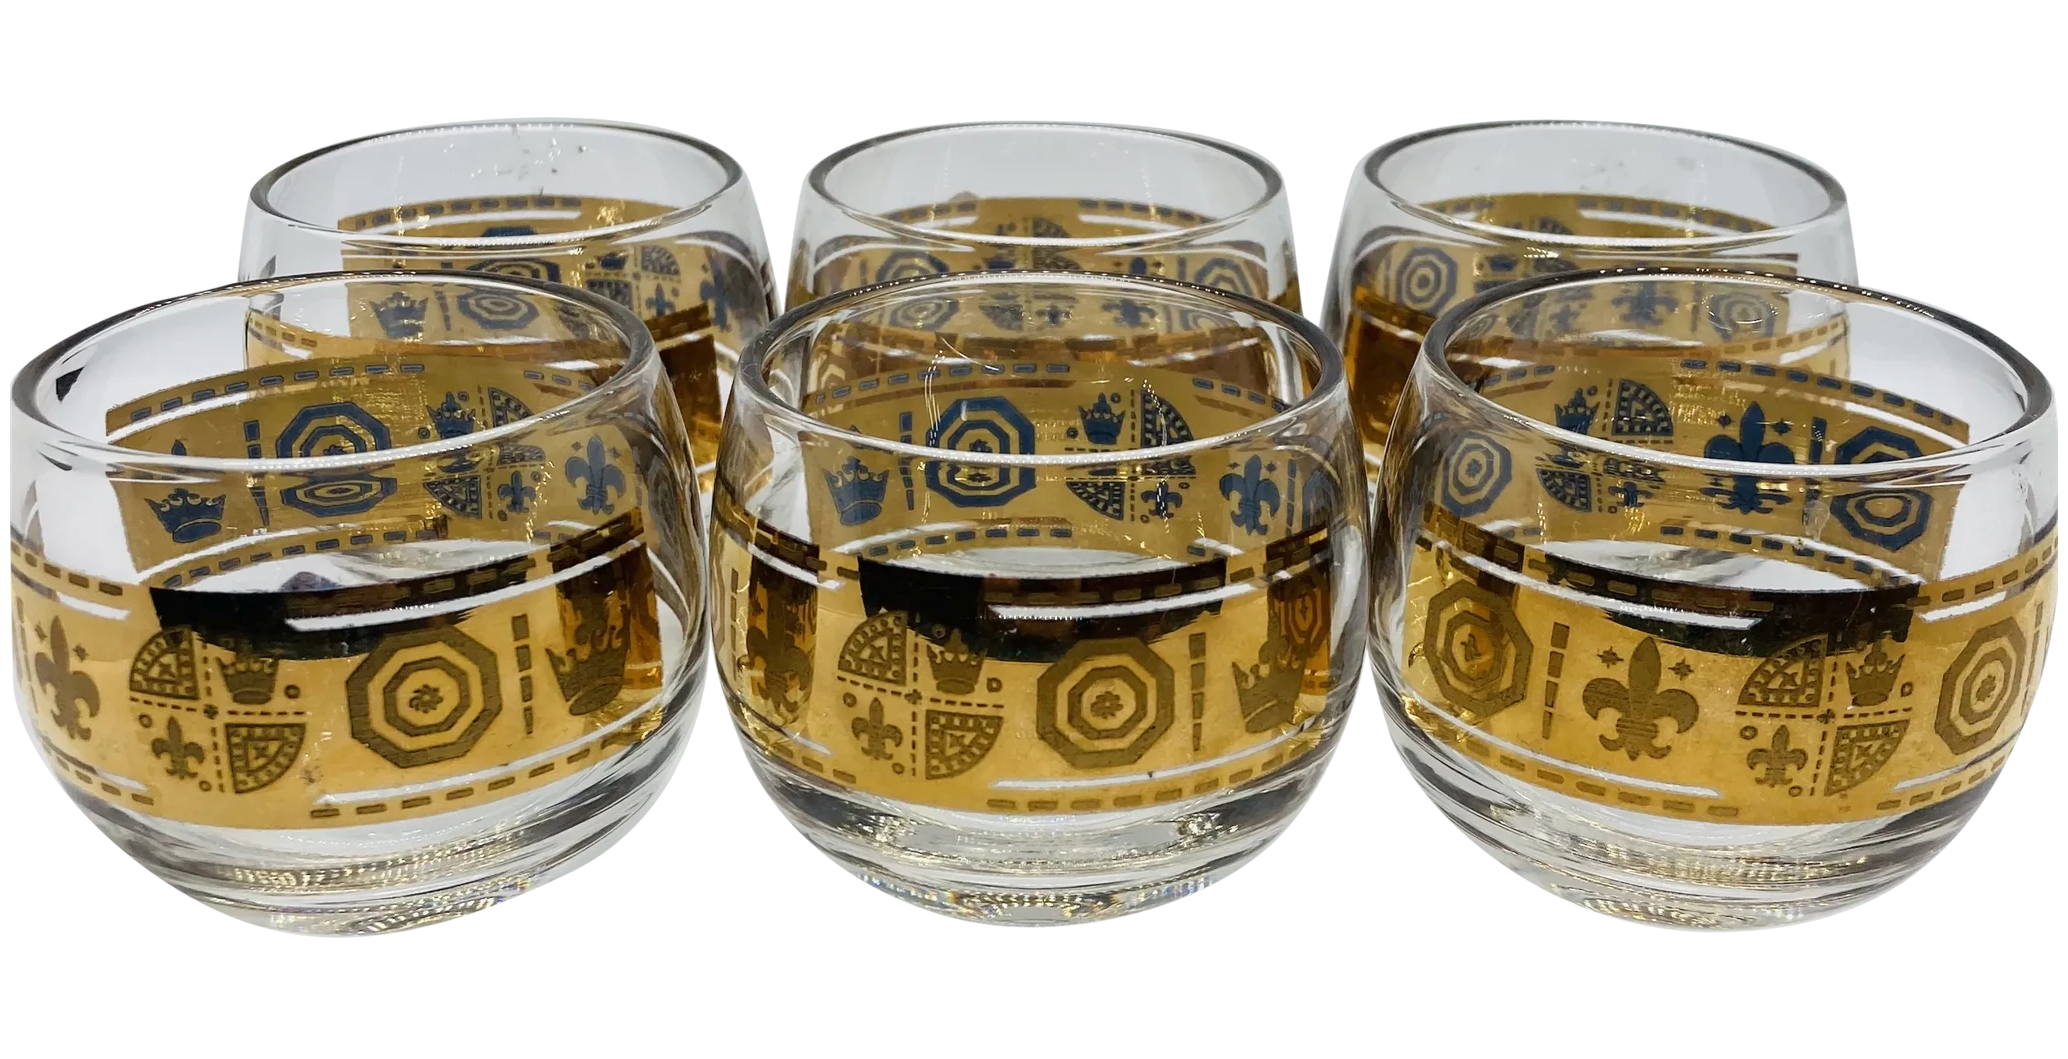 A vintage Culver set of roly-poly whiskey/cognac glasses, circa 1960s.